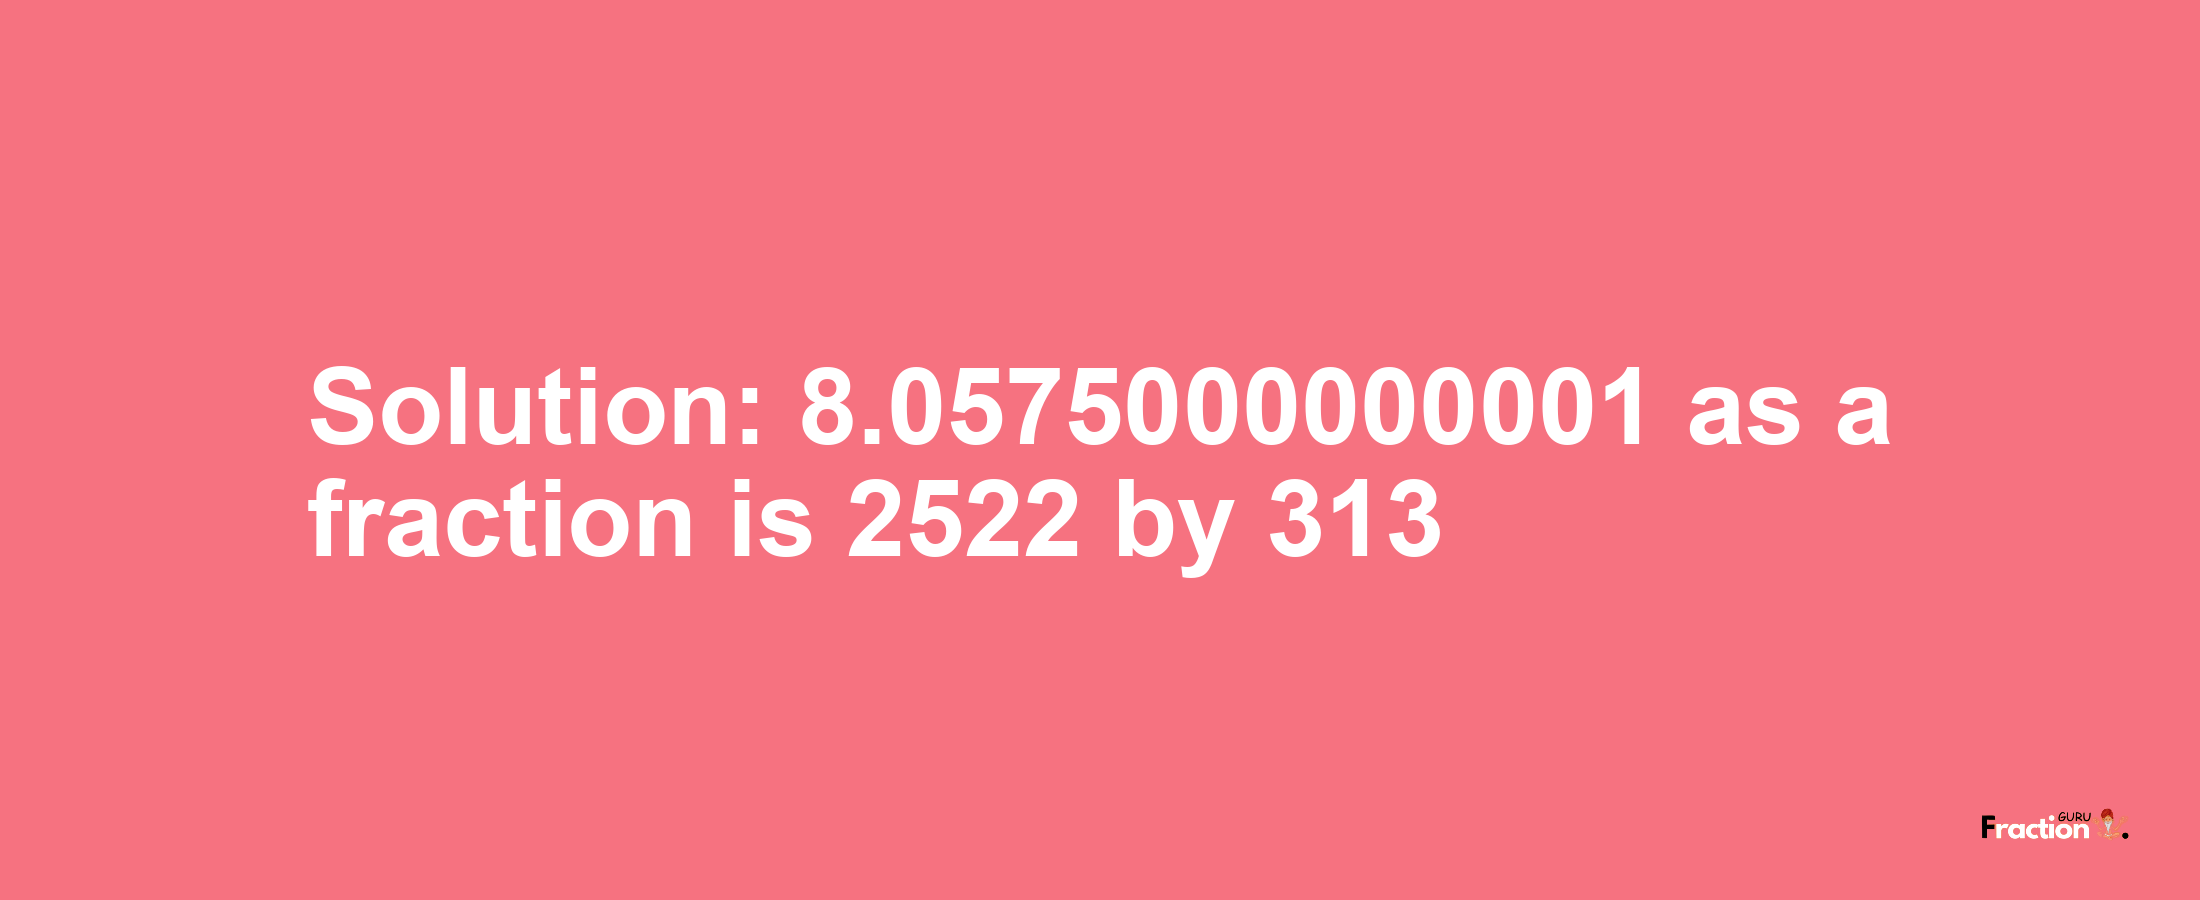 Solution:8.0575000000001 as a fraction is 2522/313